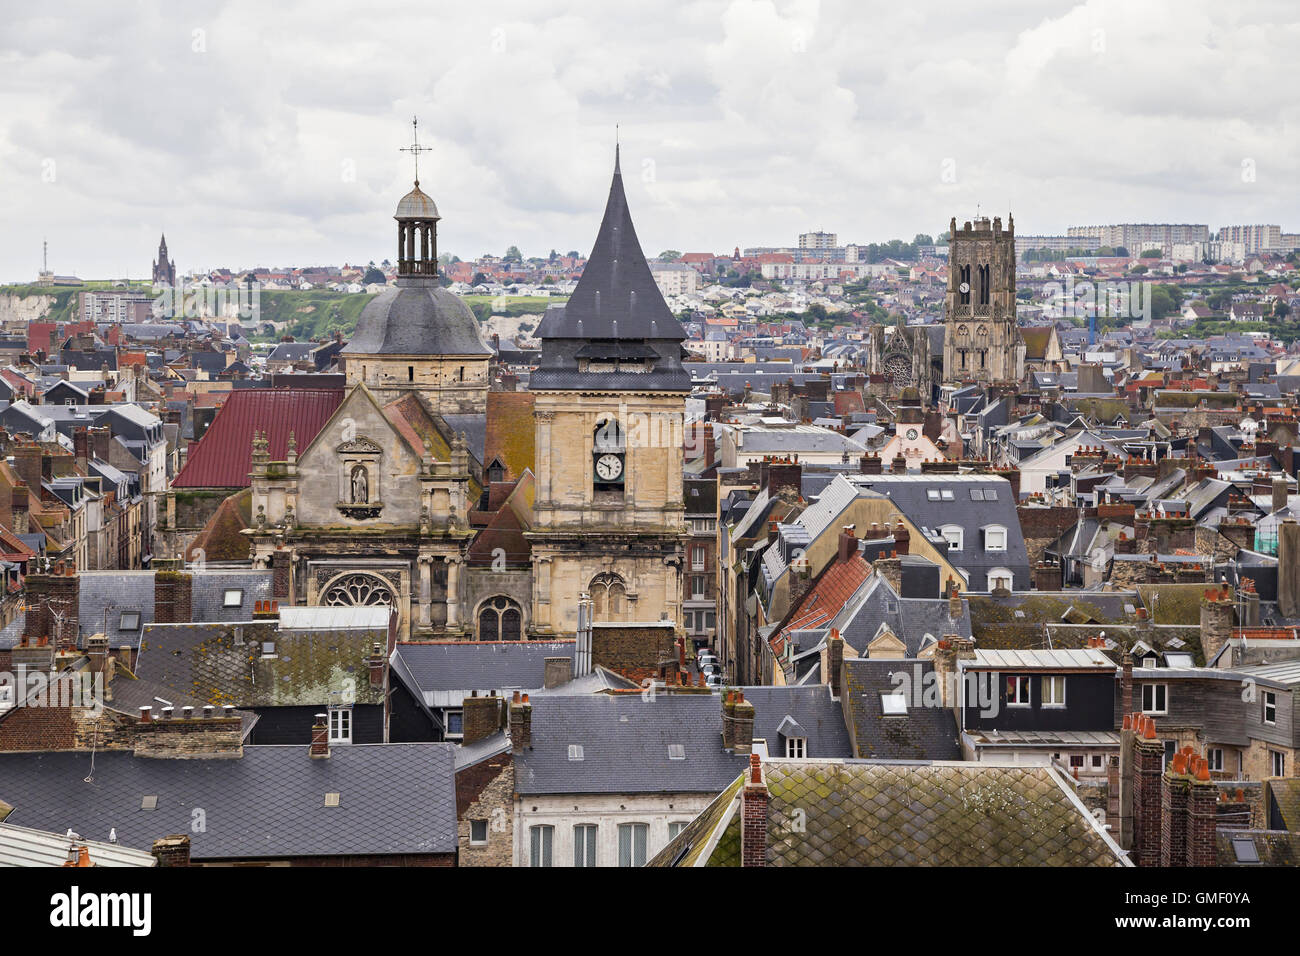 Roofs and towers of Dieppe city in Normandy, France Stock Photo